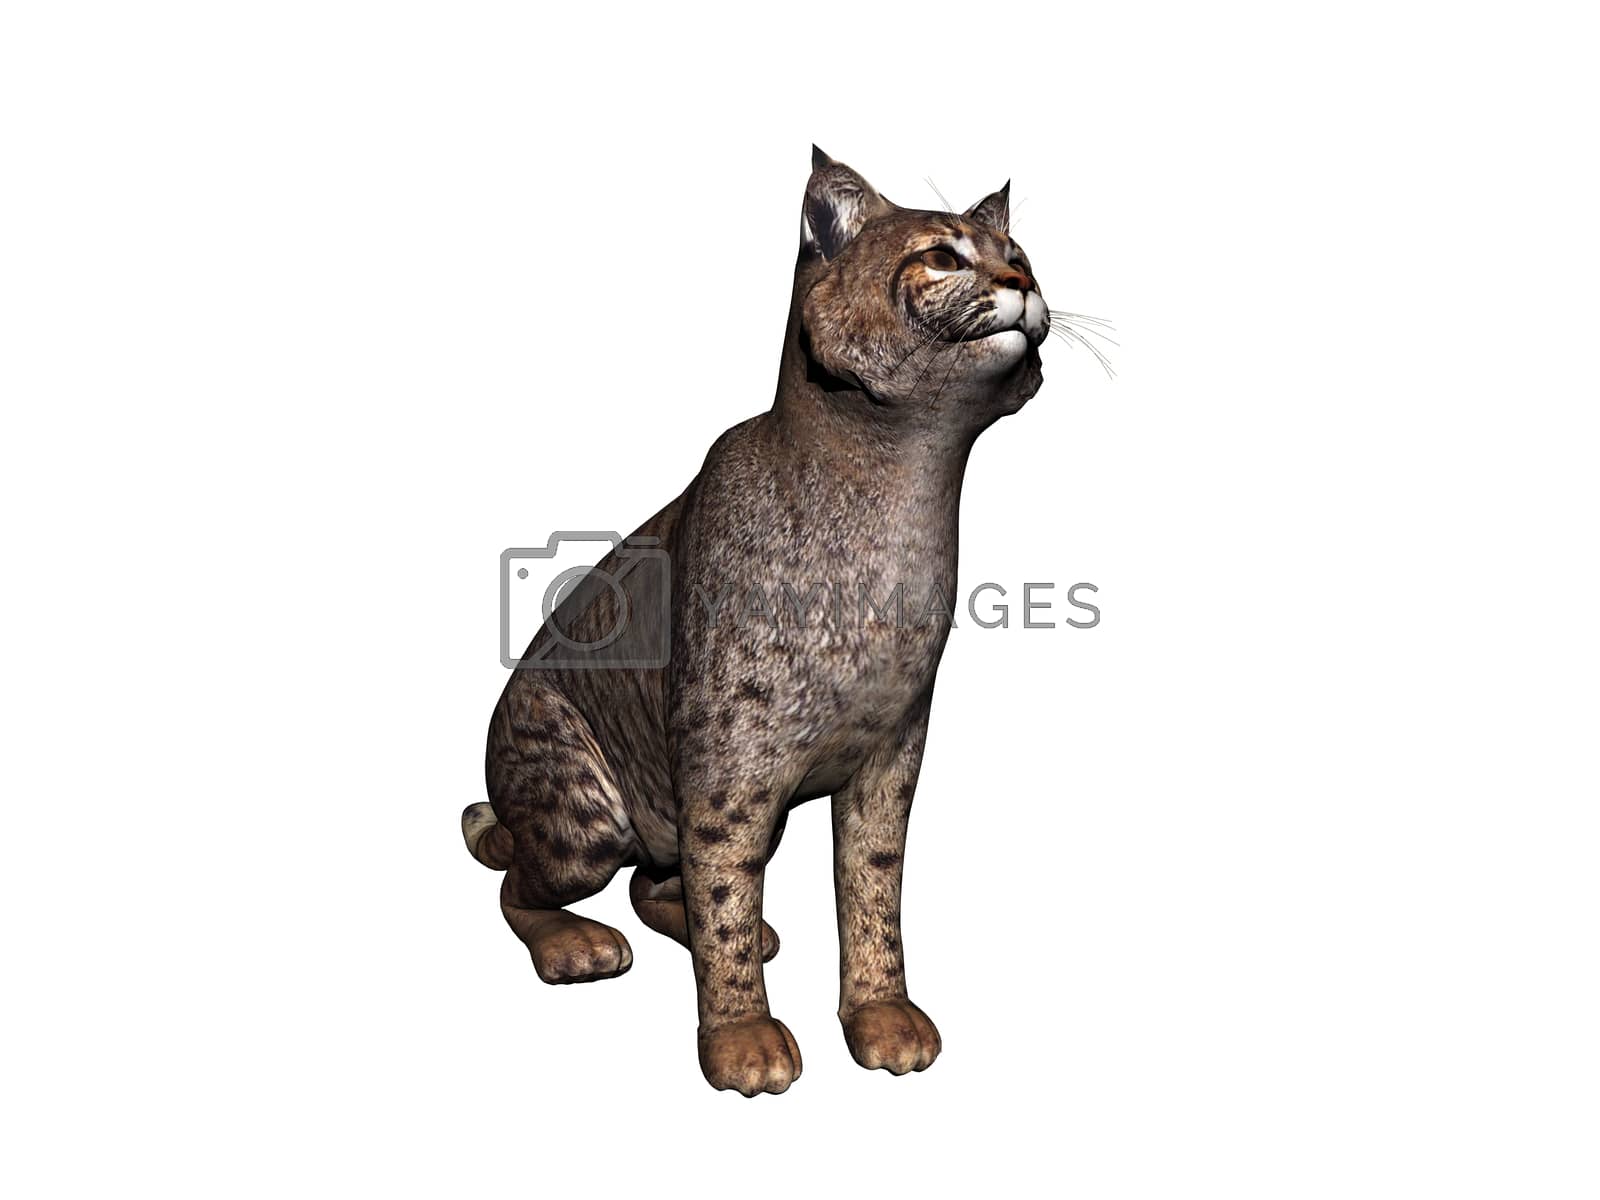 Royalty free image of Wildcat strays and jumps around by Dr-Lange